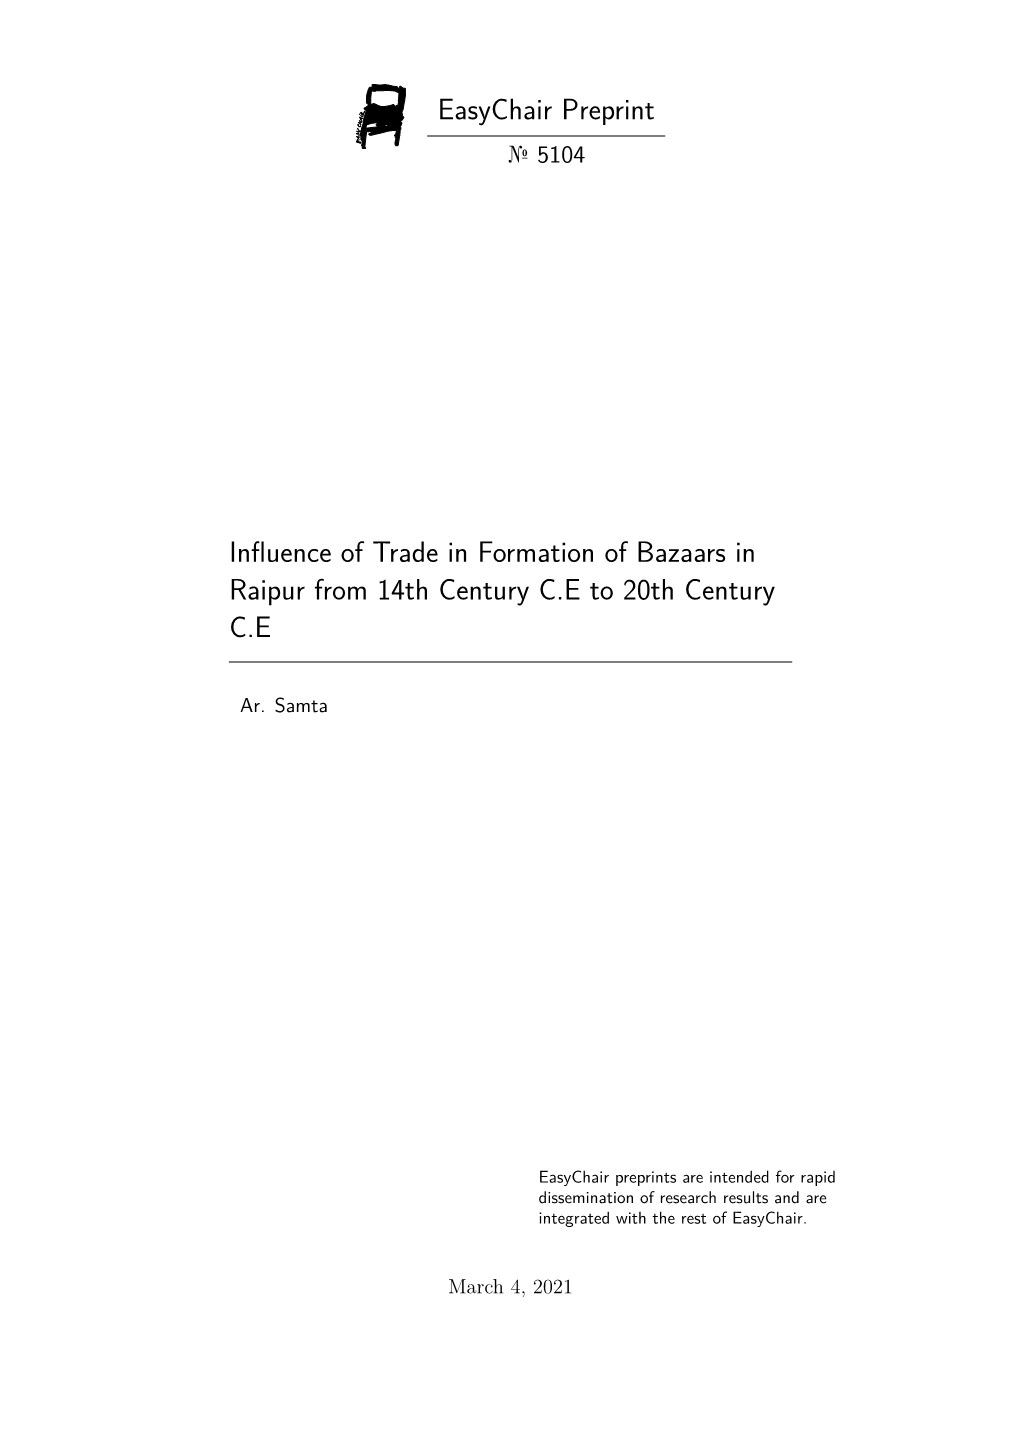 Influence of Trade in Formation of Bazaars in Raipur from 14Th Century C.E to 20Th Century C.E